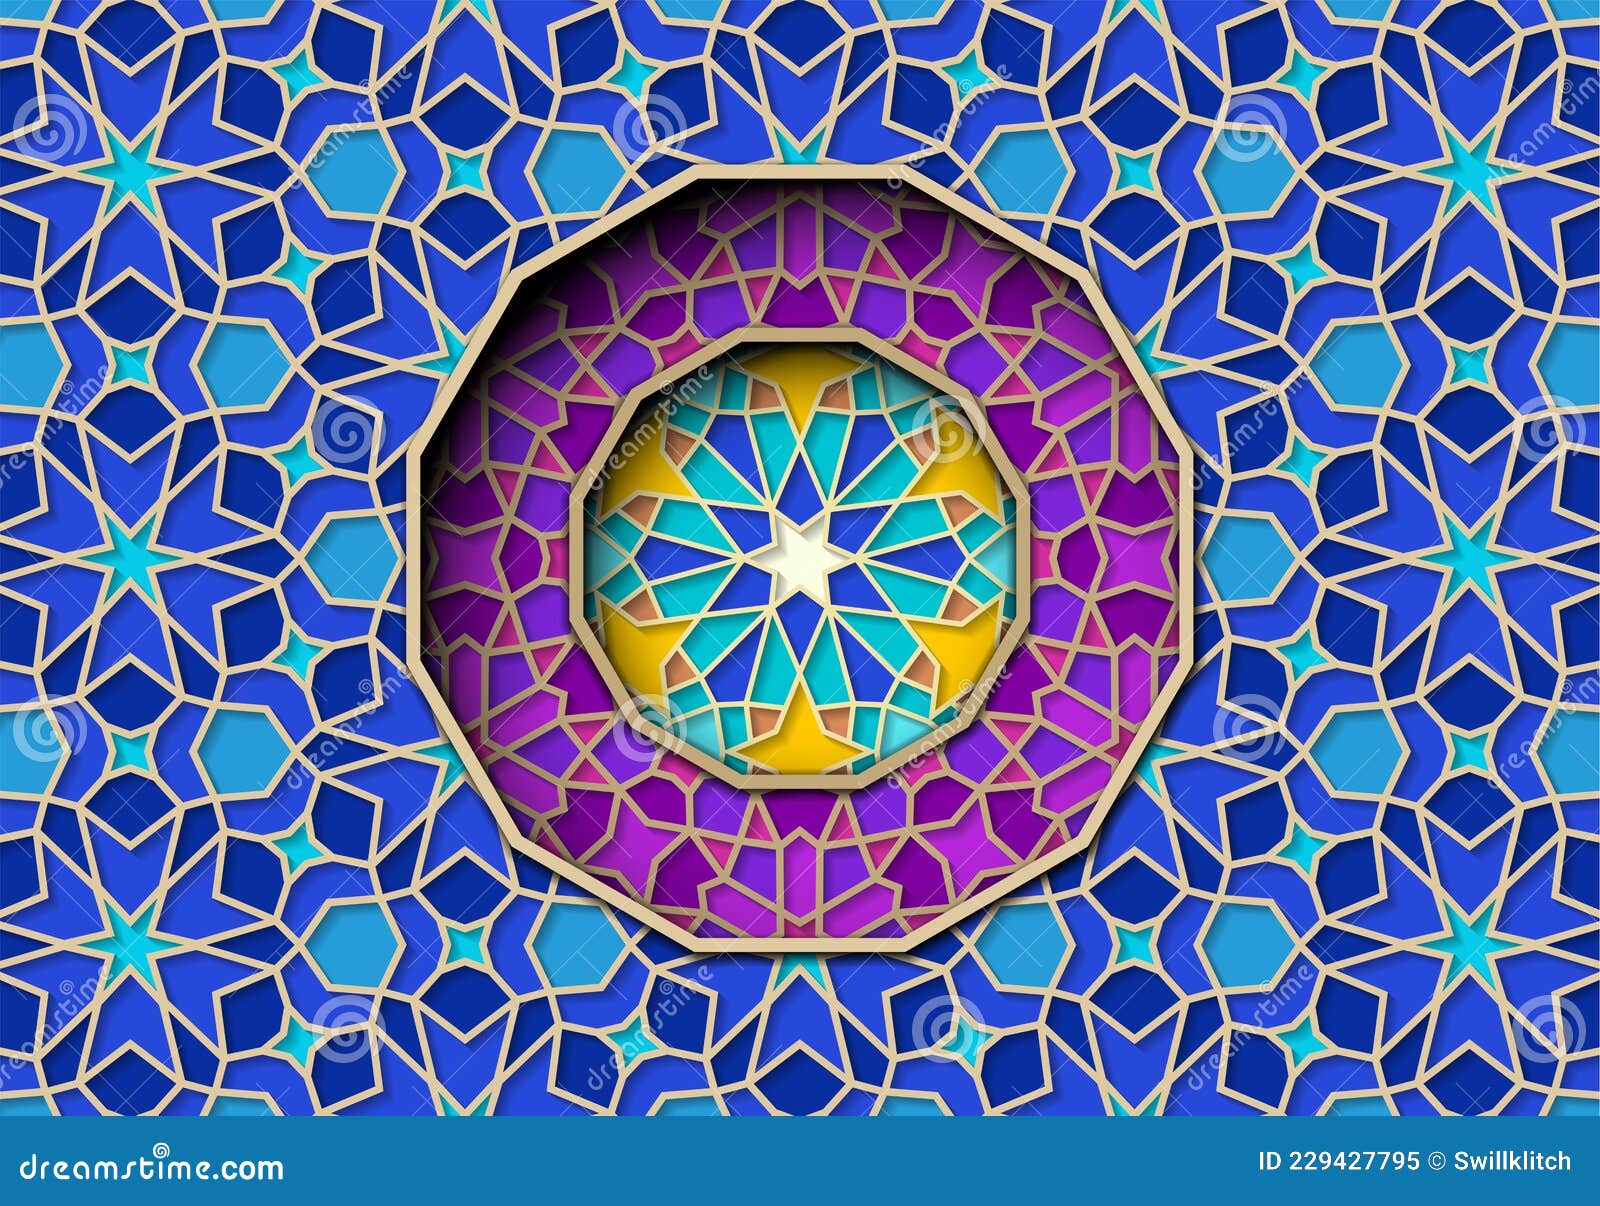 arabic ornament with girih patterns and round frame  with star. abstract islamic background with traditional